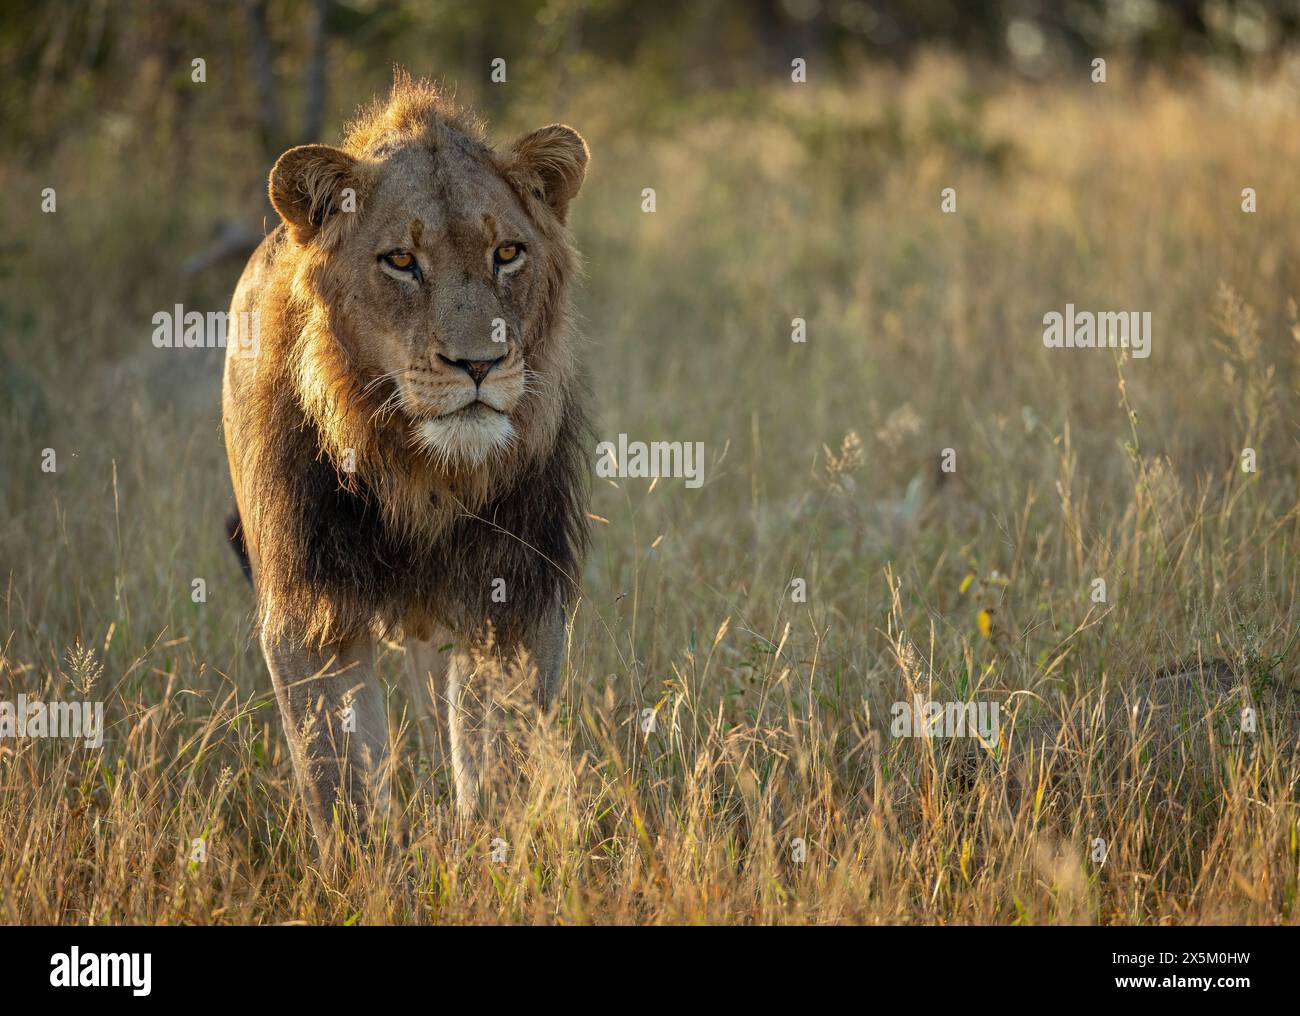 A young male lion, Panthera leo, walking through grass, backlit. Stock Photo